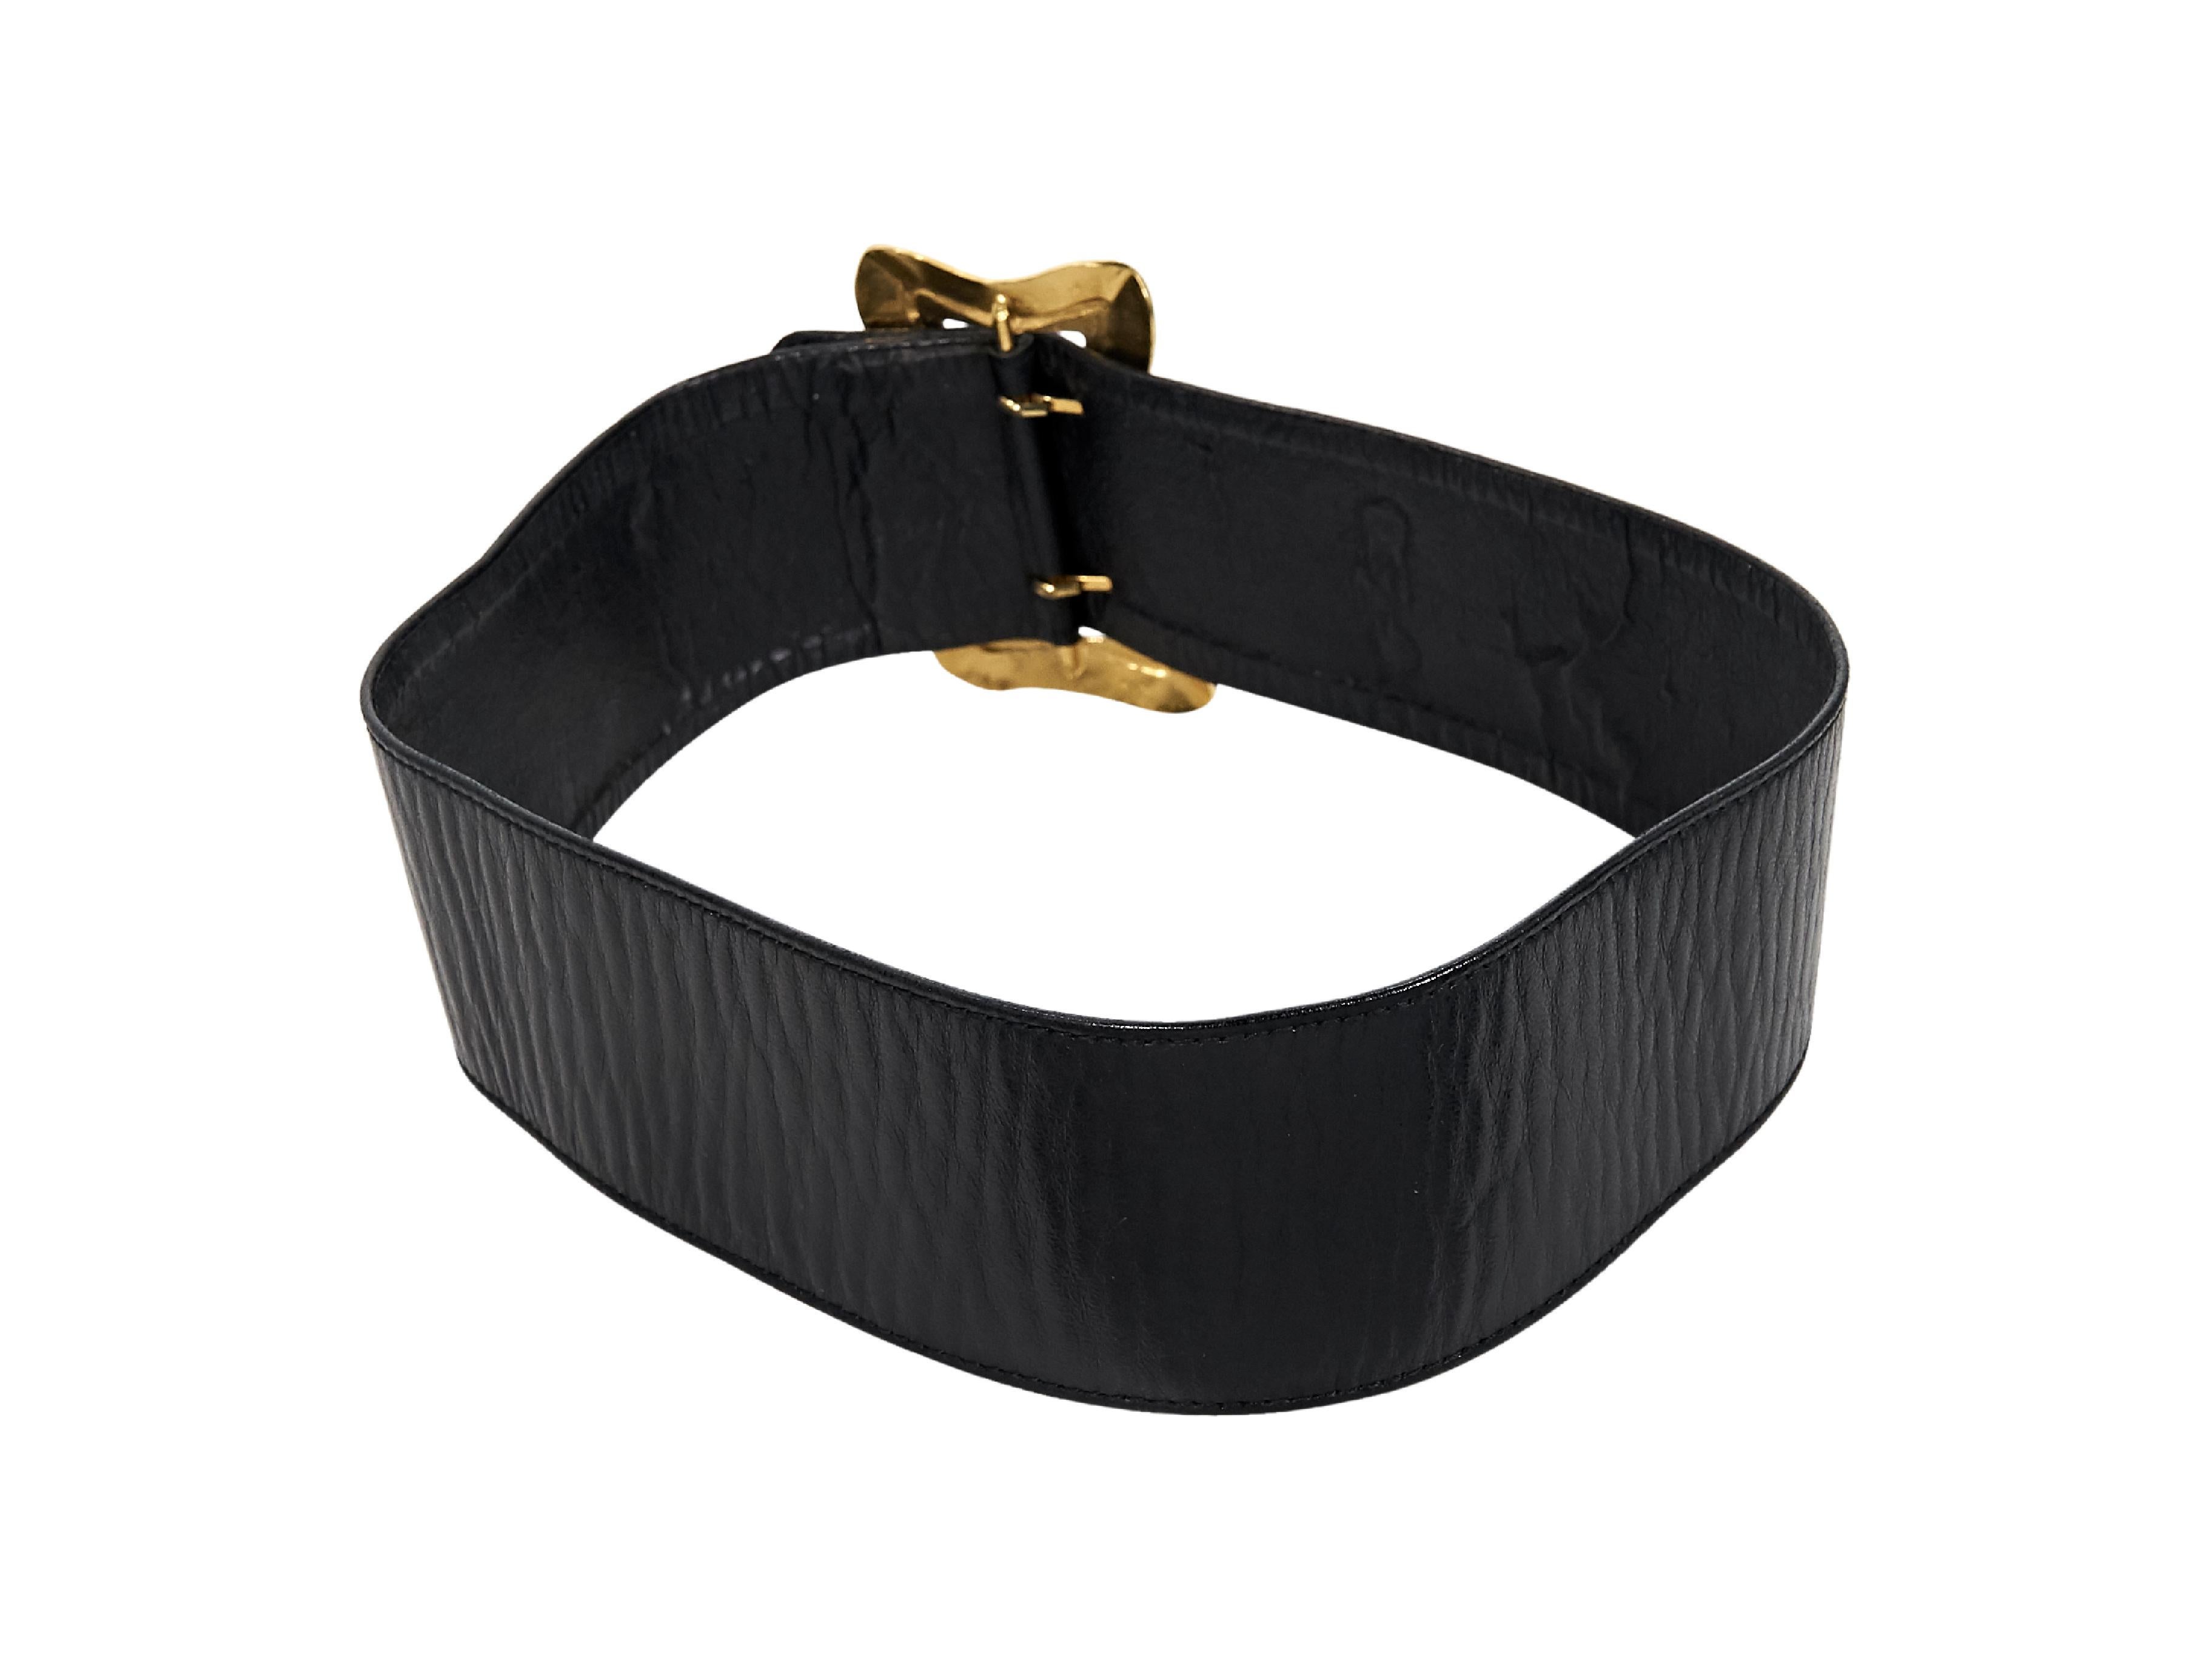 Product details:  Vintage black wide leather belt by Chanel.  Accented with butterfly details.  Adjustable buckle closure.  Goldtone hardware.  27